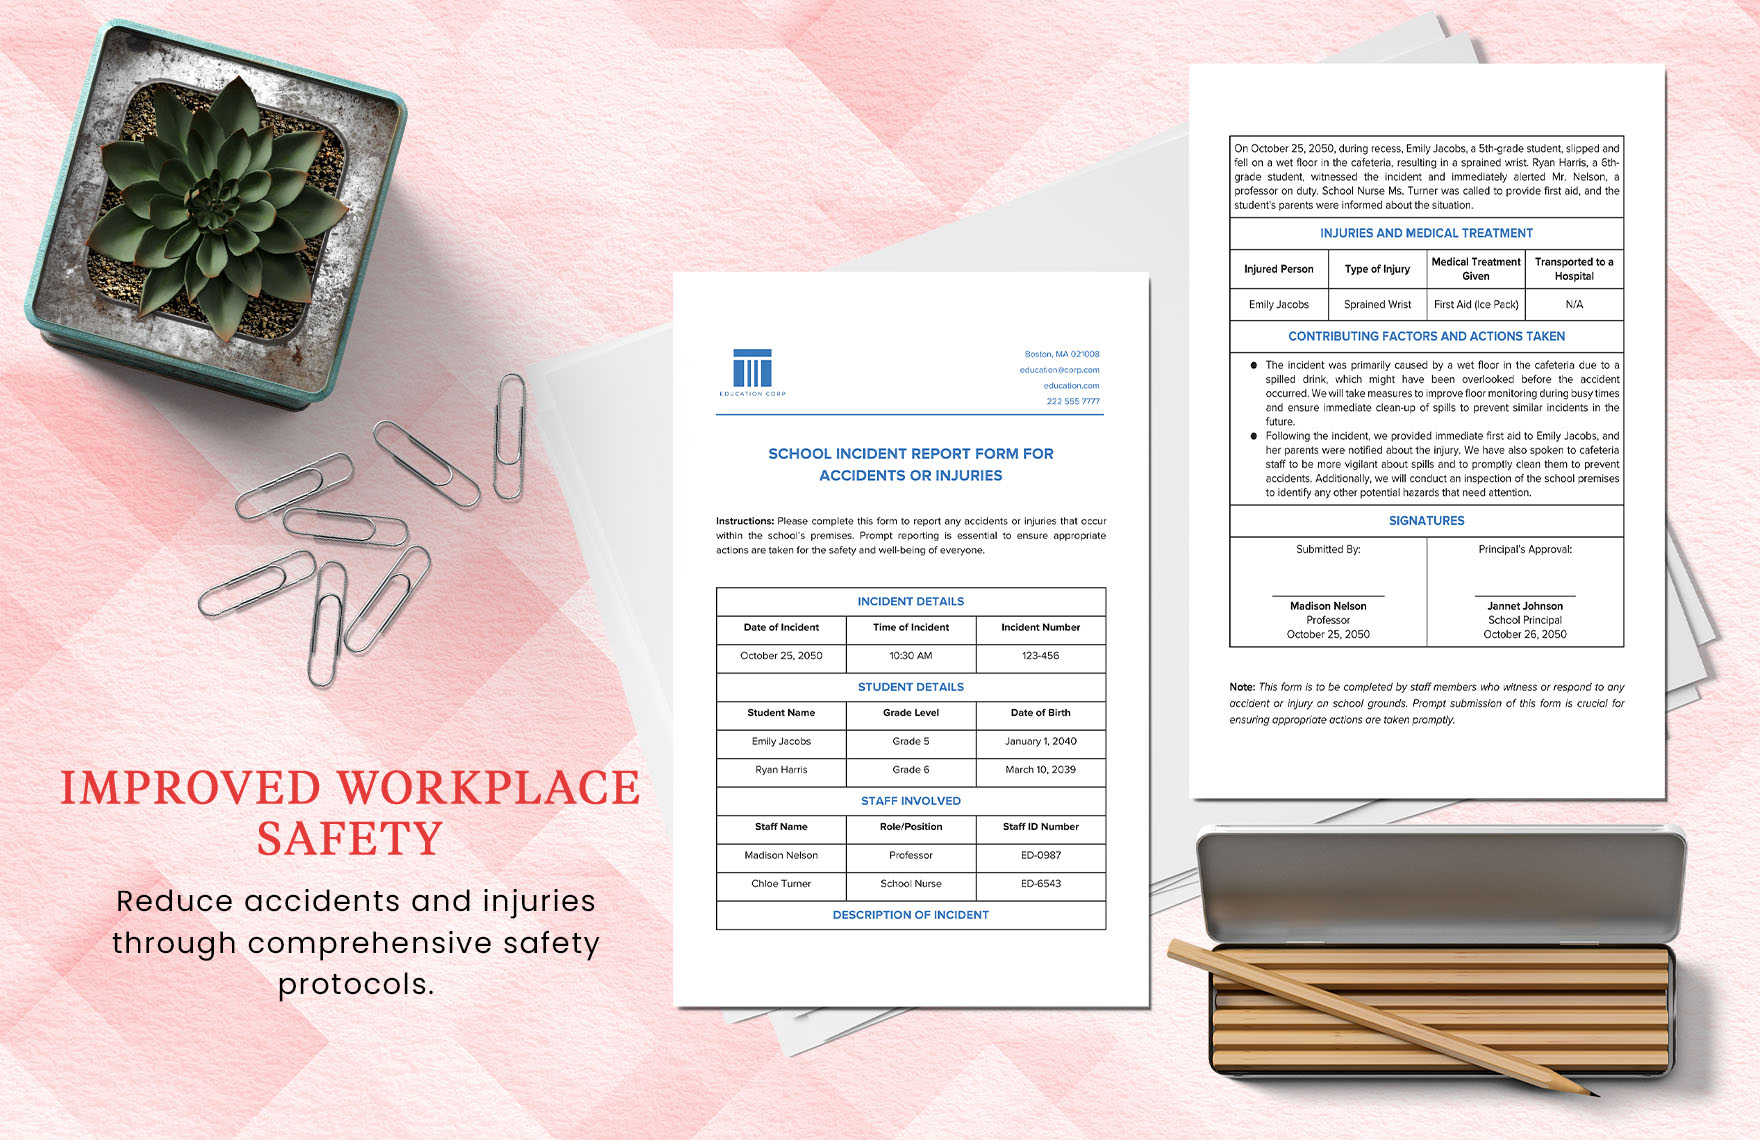 School Incident Report Form for Accidents or Injuries Template